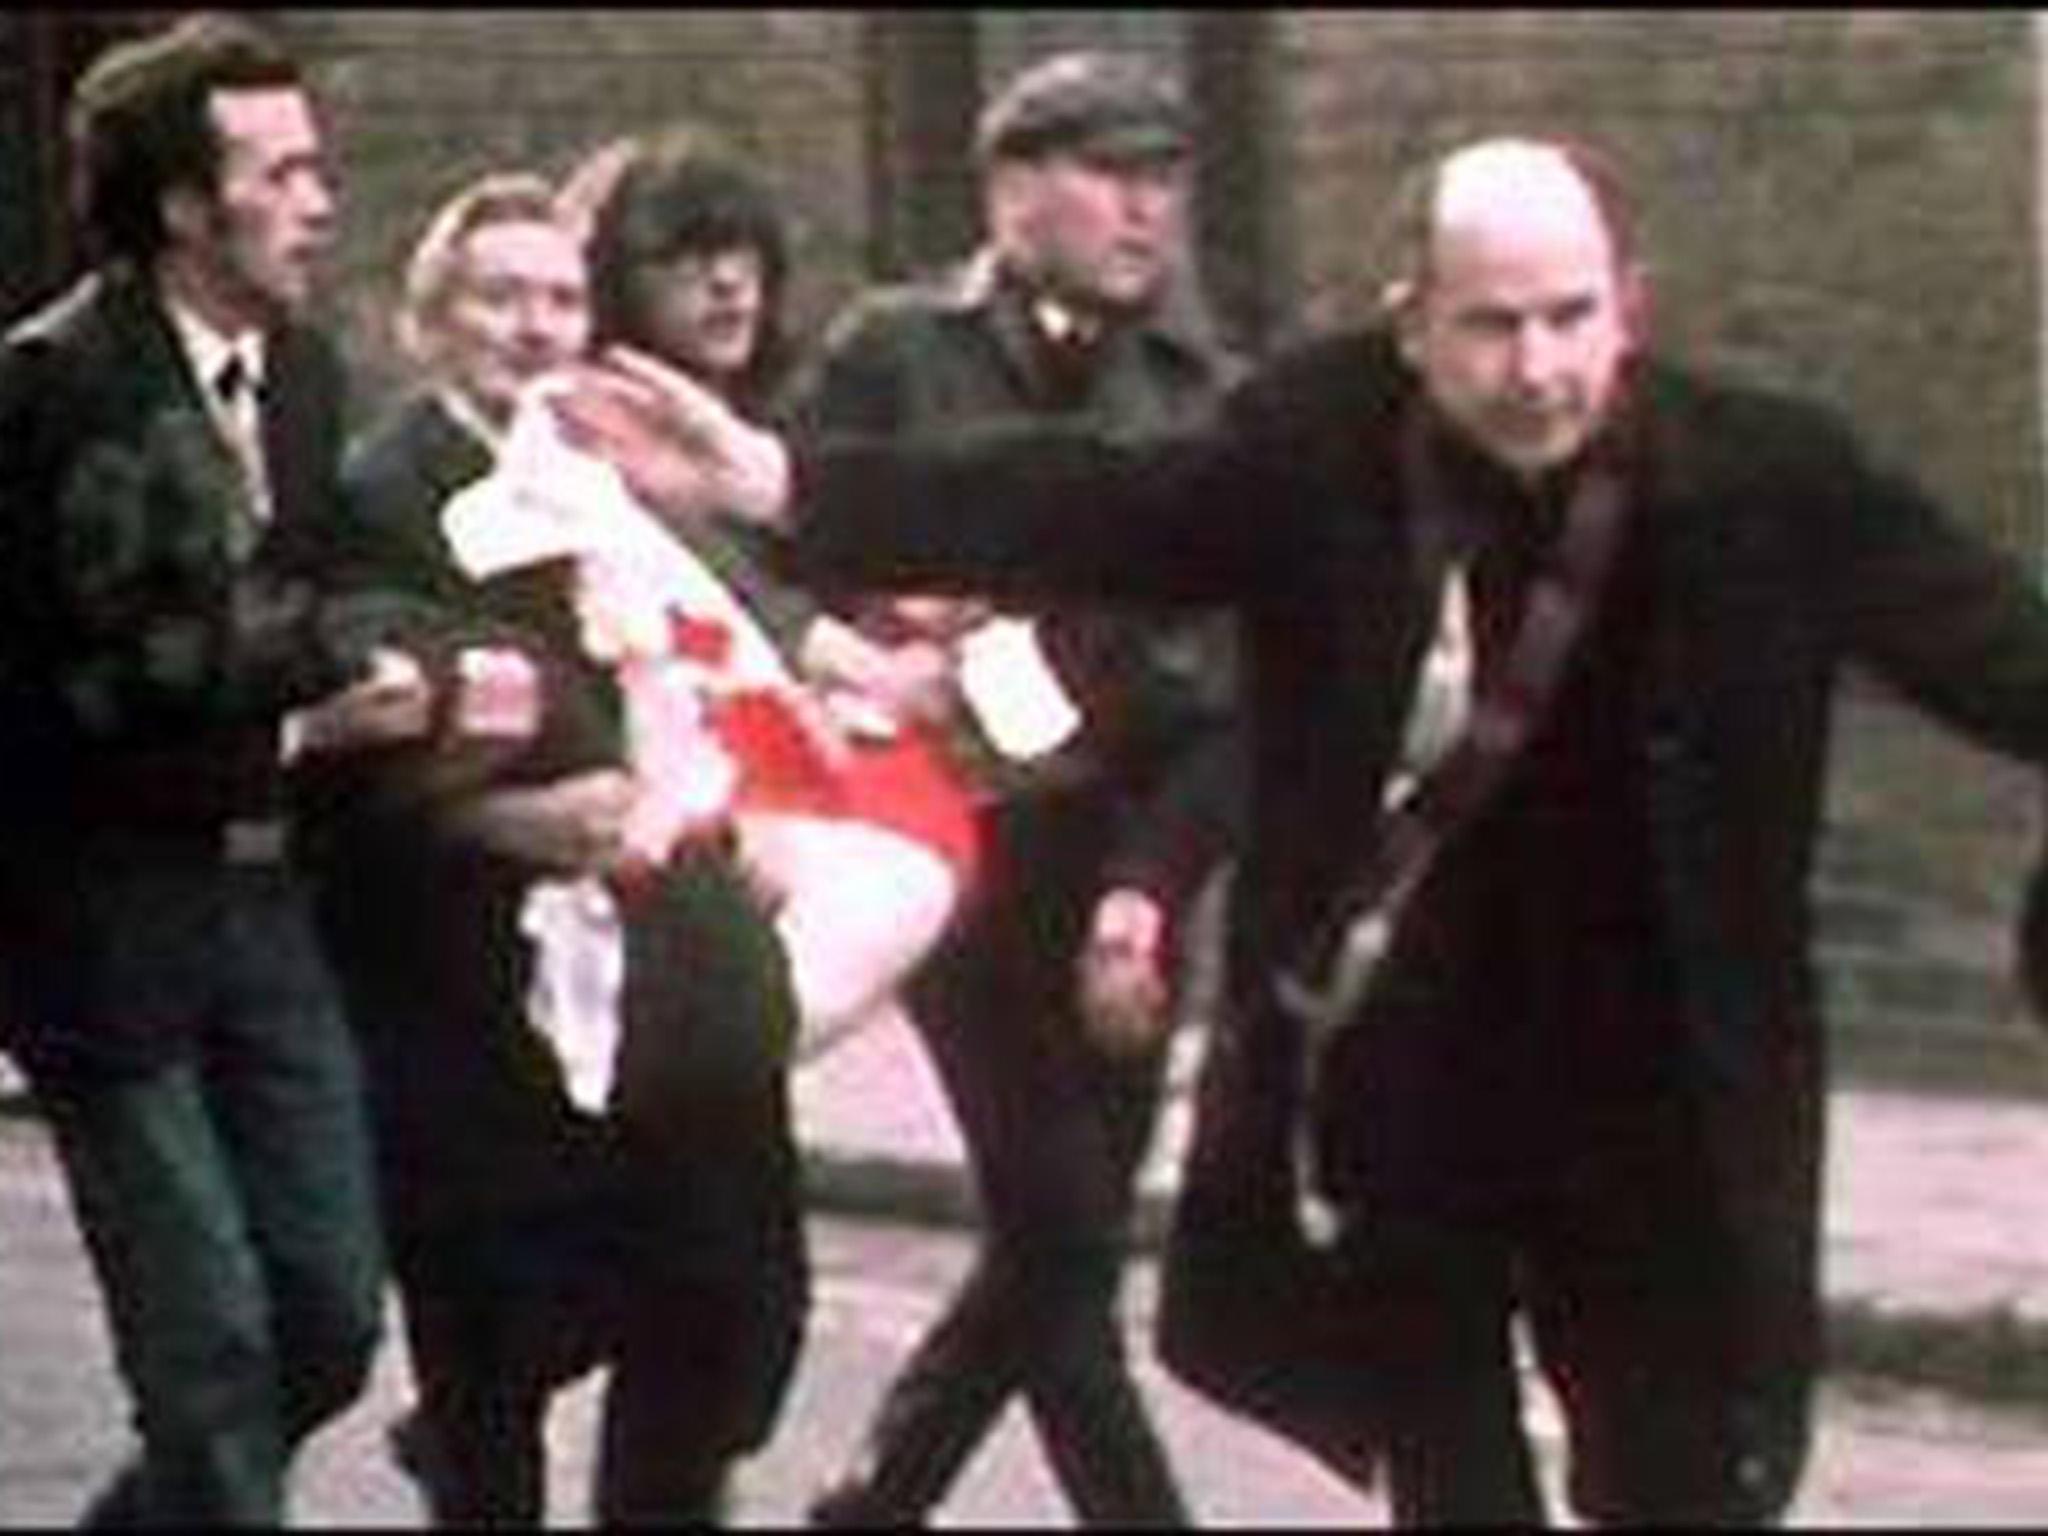 Dr Daly waved a blood-stained white handkerchief as a symbol of ceasefire while trying to help Duddy on Bloody Sunday